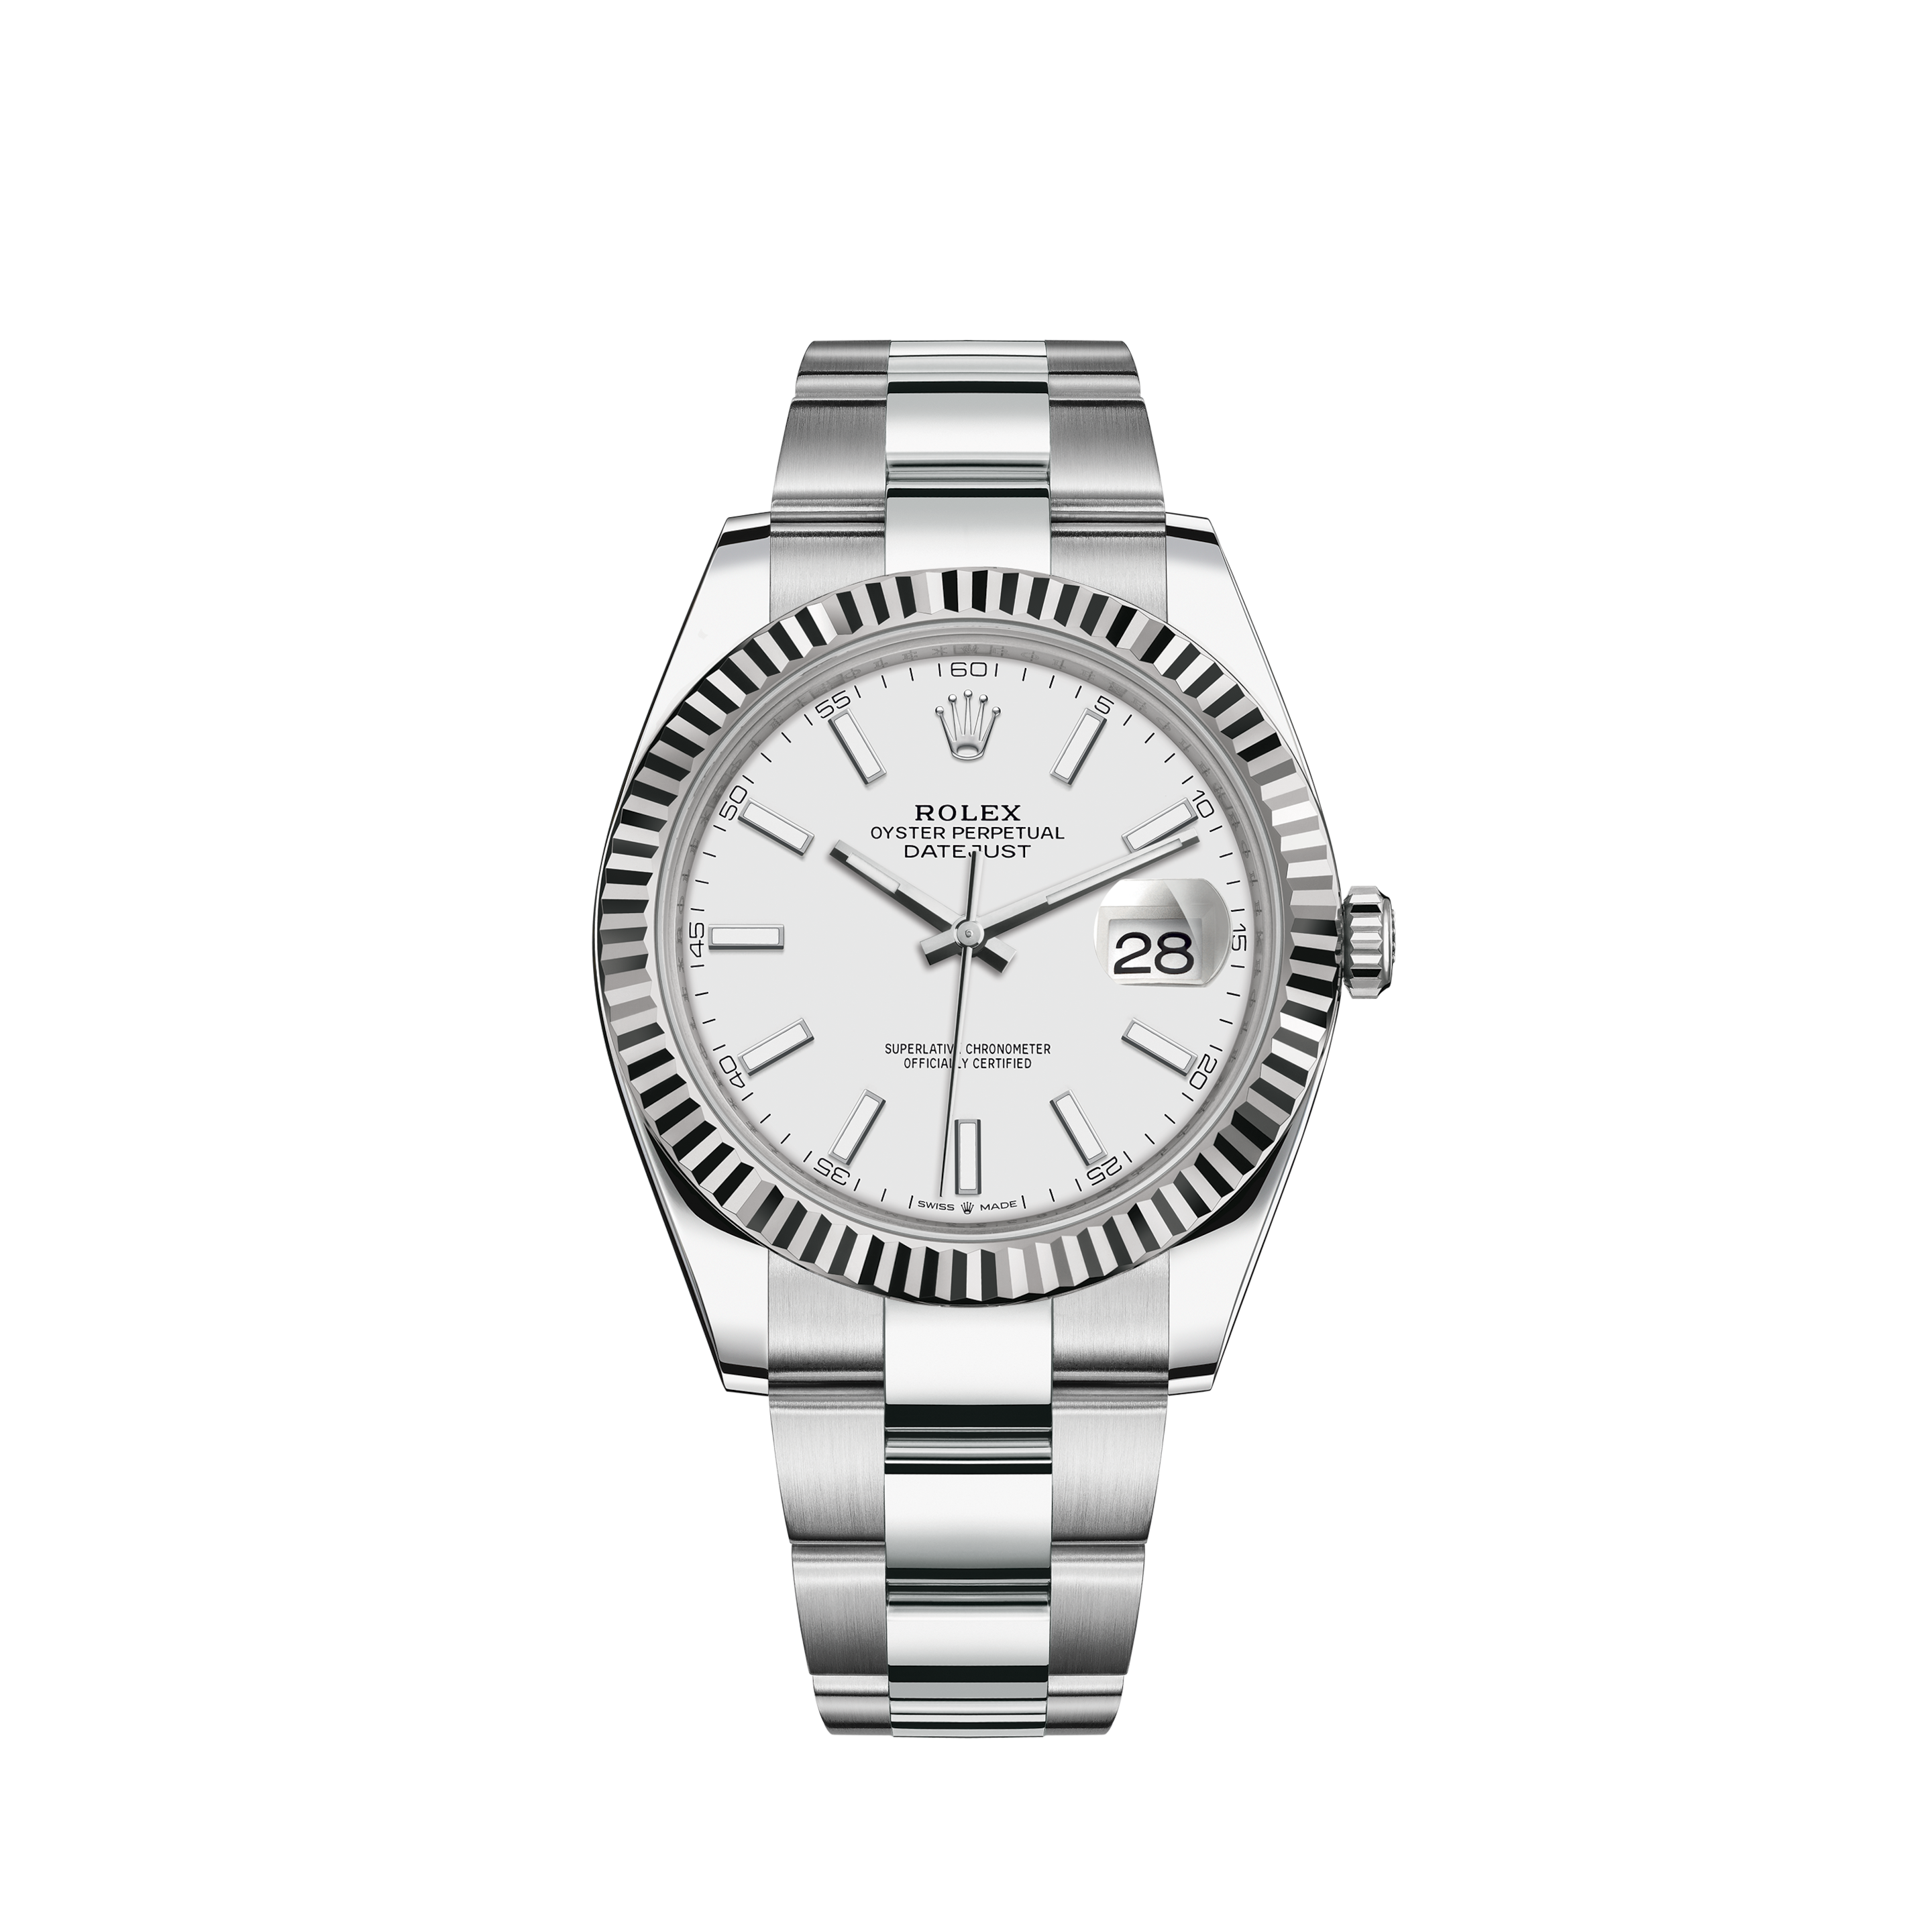 Rolex STUNNING 1665 Great White Sea-Dweller RAIL dial 1979Rolex Oyster Perpetual Date 1501